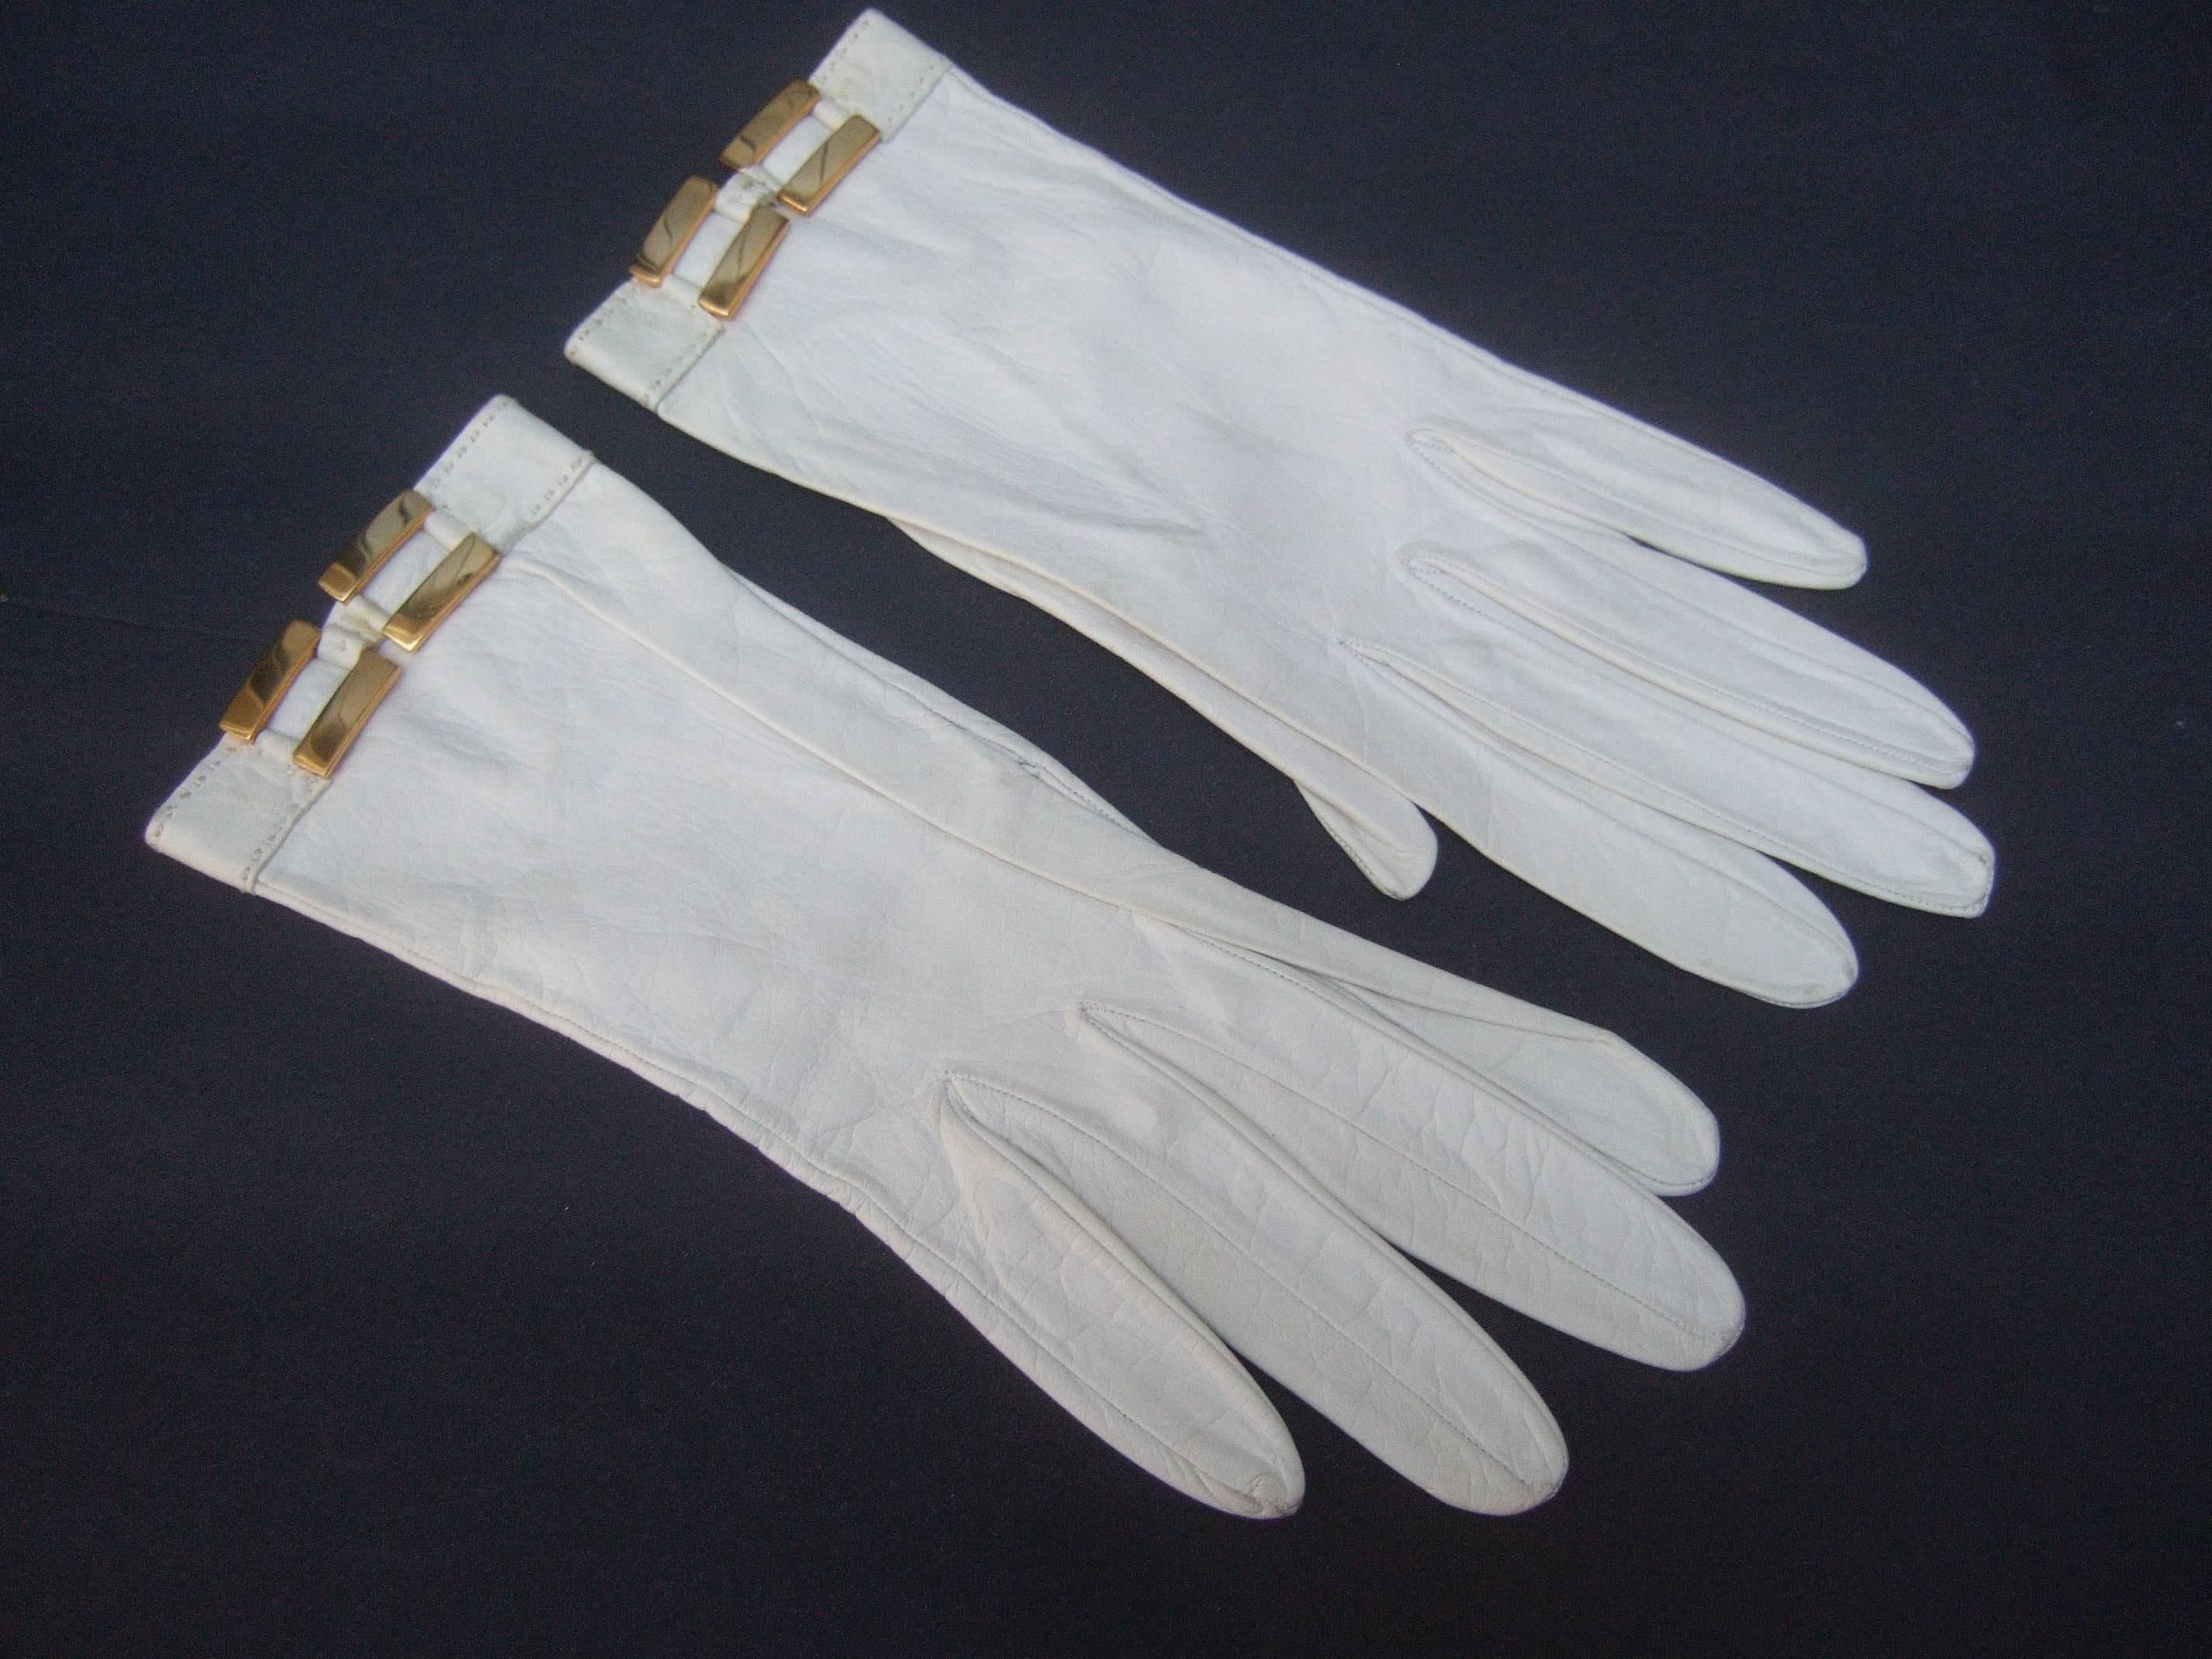 Hermes Paris White kidskin leather gloves ca 1970
The elegant retro gloves are designed with supple
white leather adorned with gilt metal buckles

The classic white leather glove makes a chic 
timeless accessory

Stamped Hermes Paris